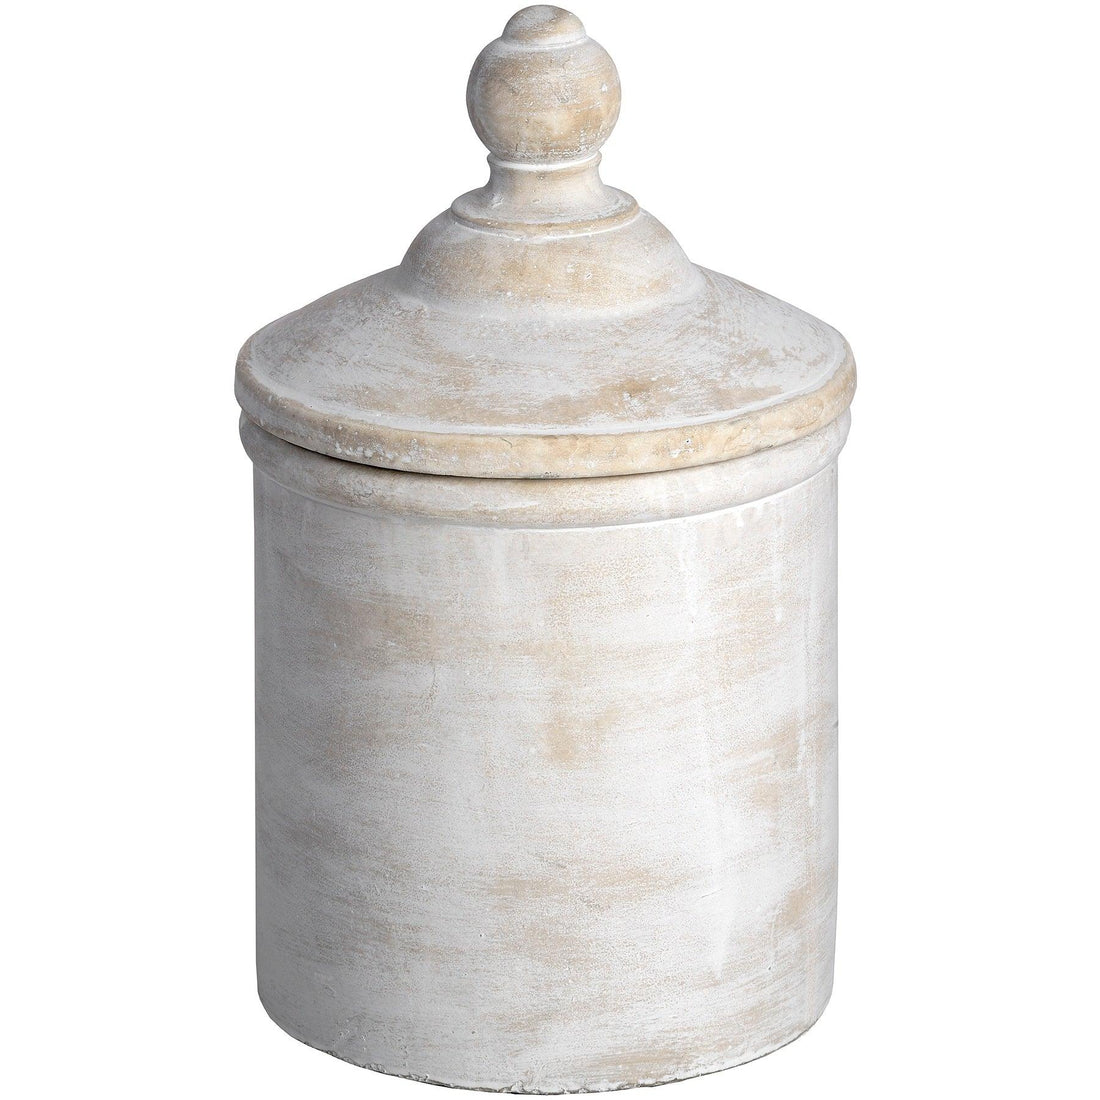 Large Antique White Cannister - £49.95 - Gifts & Accessories > Kitchen And Tableware > Storage Boxes 